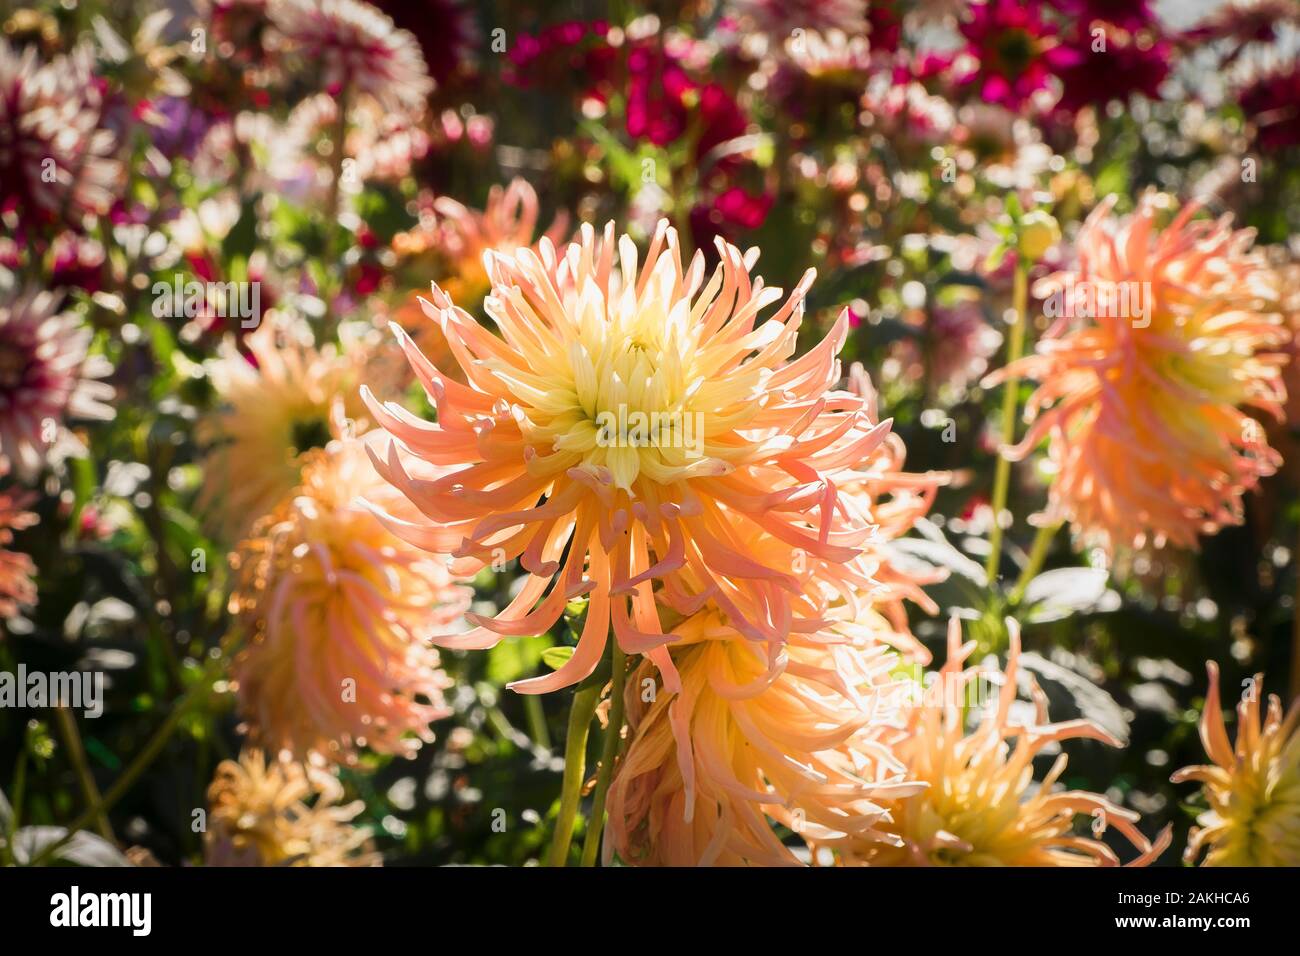 Somewhat shaggy petals of  Dahlia Albert Schweitzer which is one of semi-cactus type of dahlias. Stock Photo